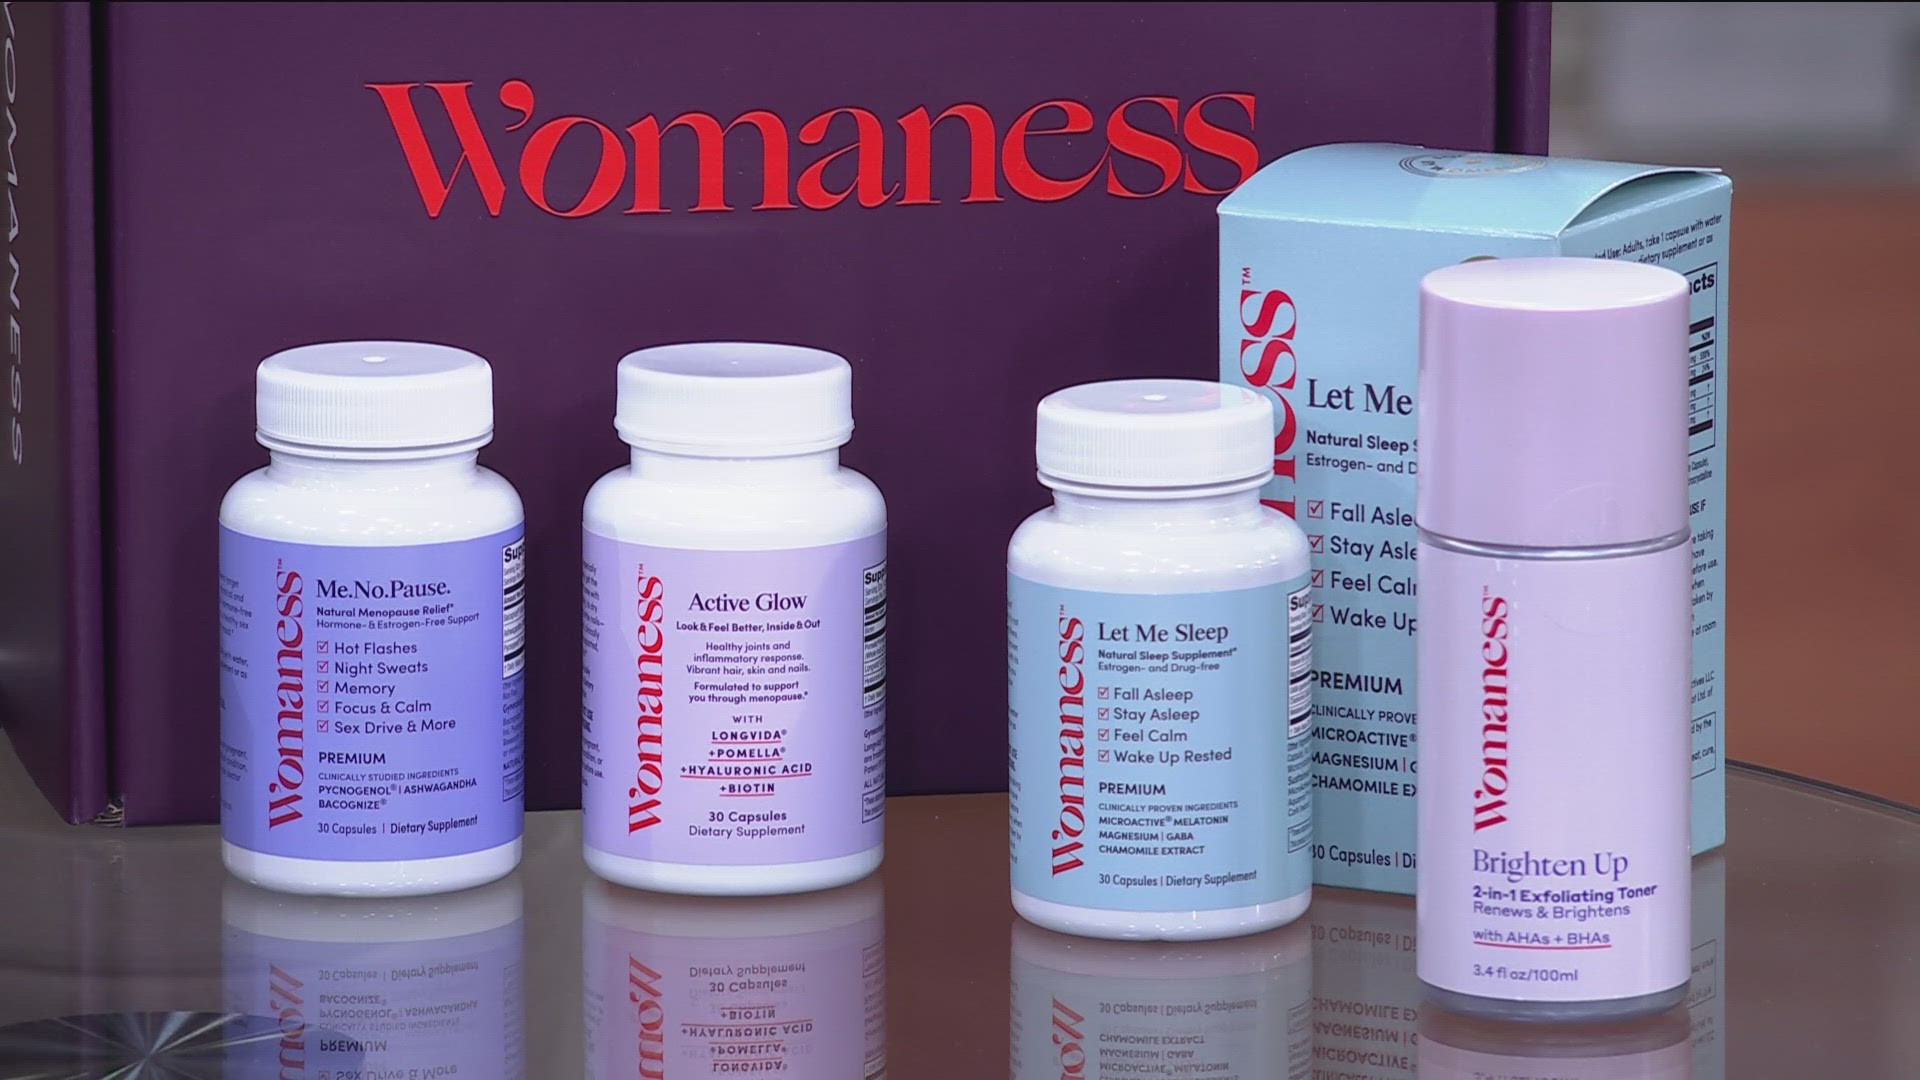 Mall of America host Womaness & Well Being event